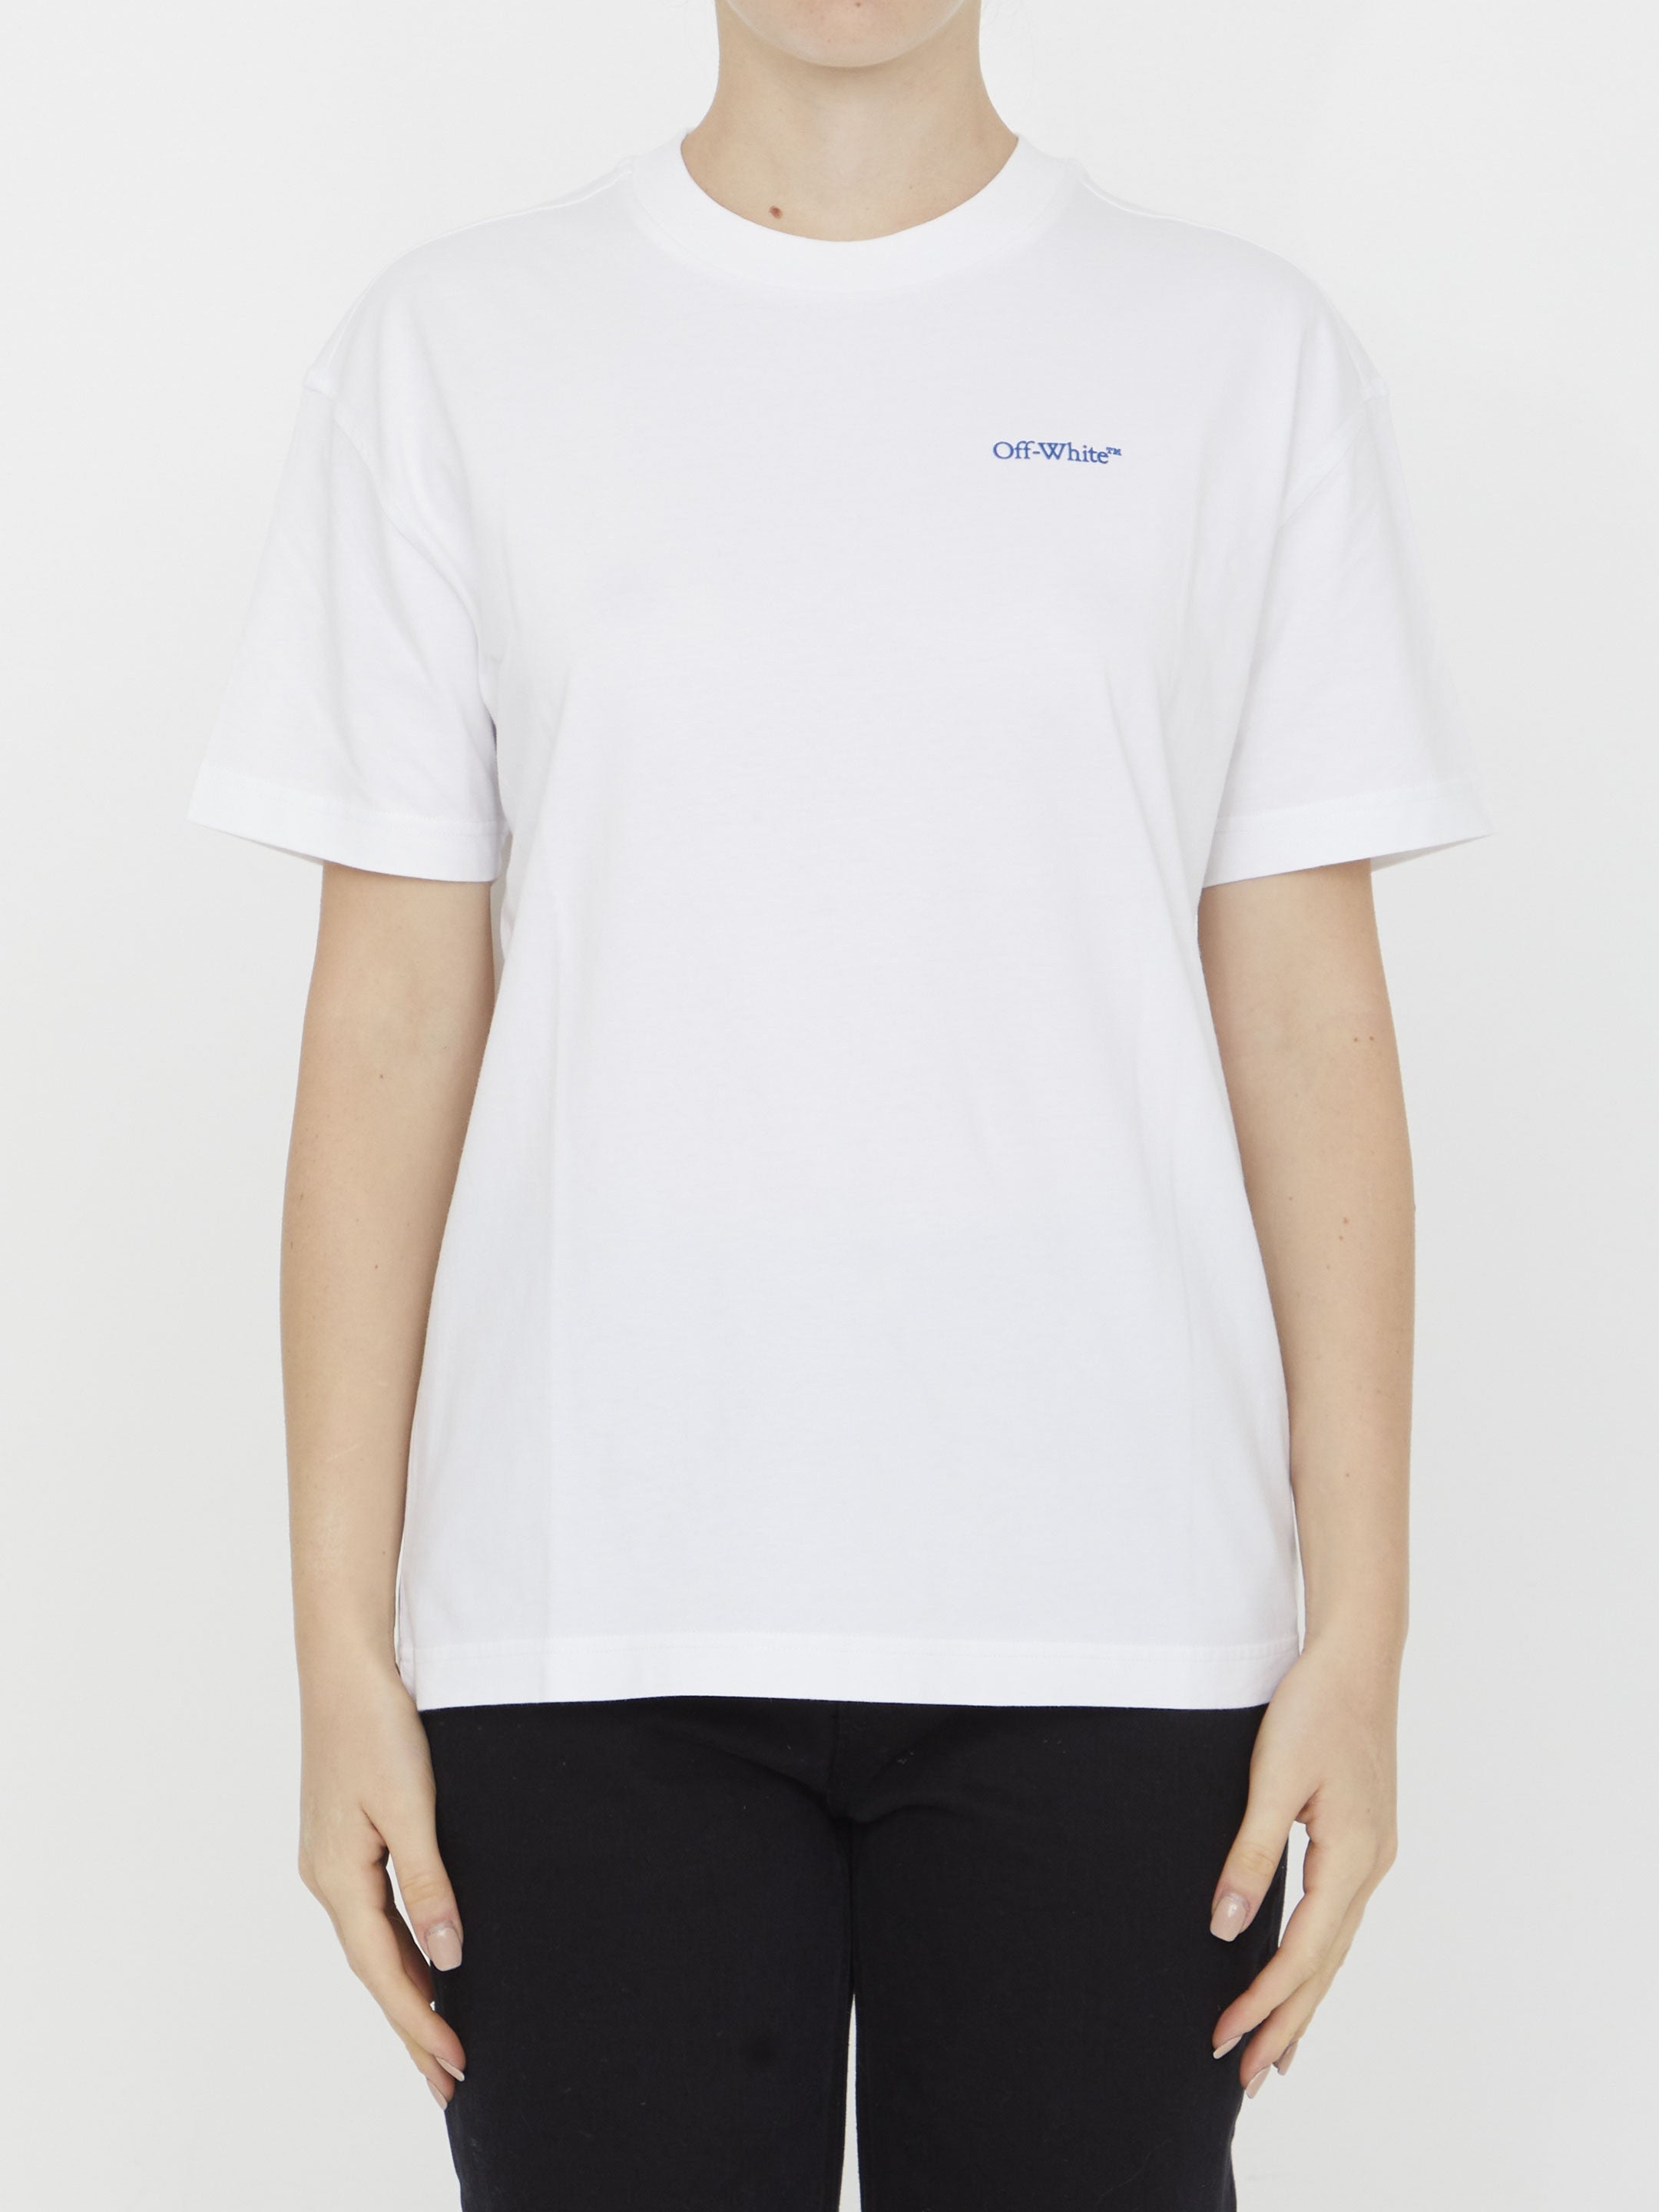 OFF-WHITE-OUTLET-SALE-Diag-Tab-t-shirt-Shirts-XS-WHITE-ARCHIVE-COLLECTION.jpg